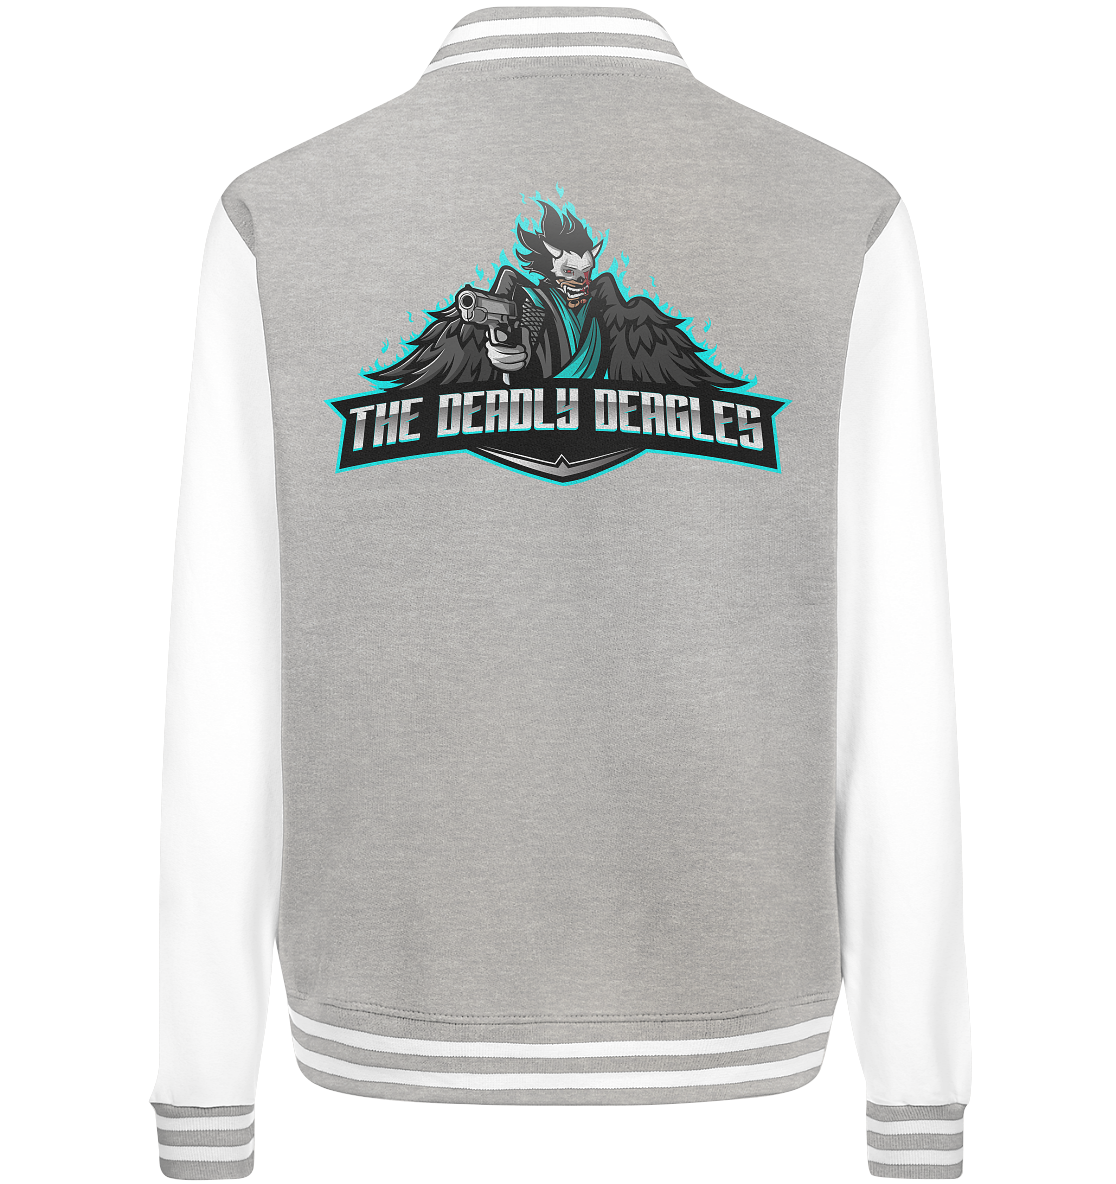 THE DEADLY DEAGLES - Basic College Jacke